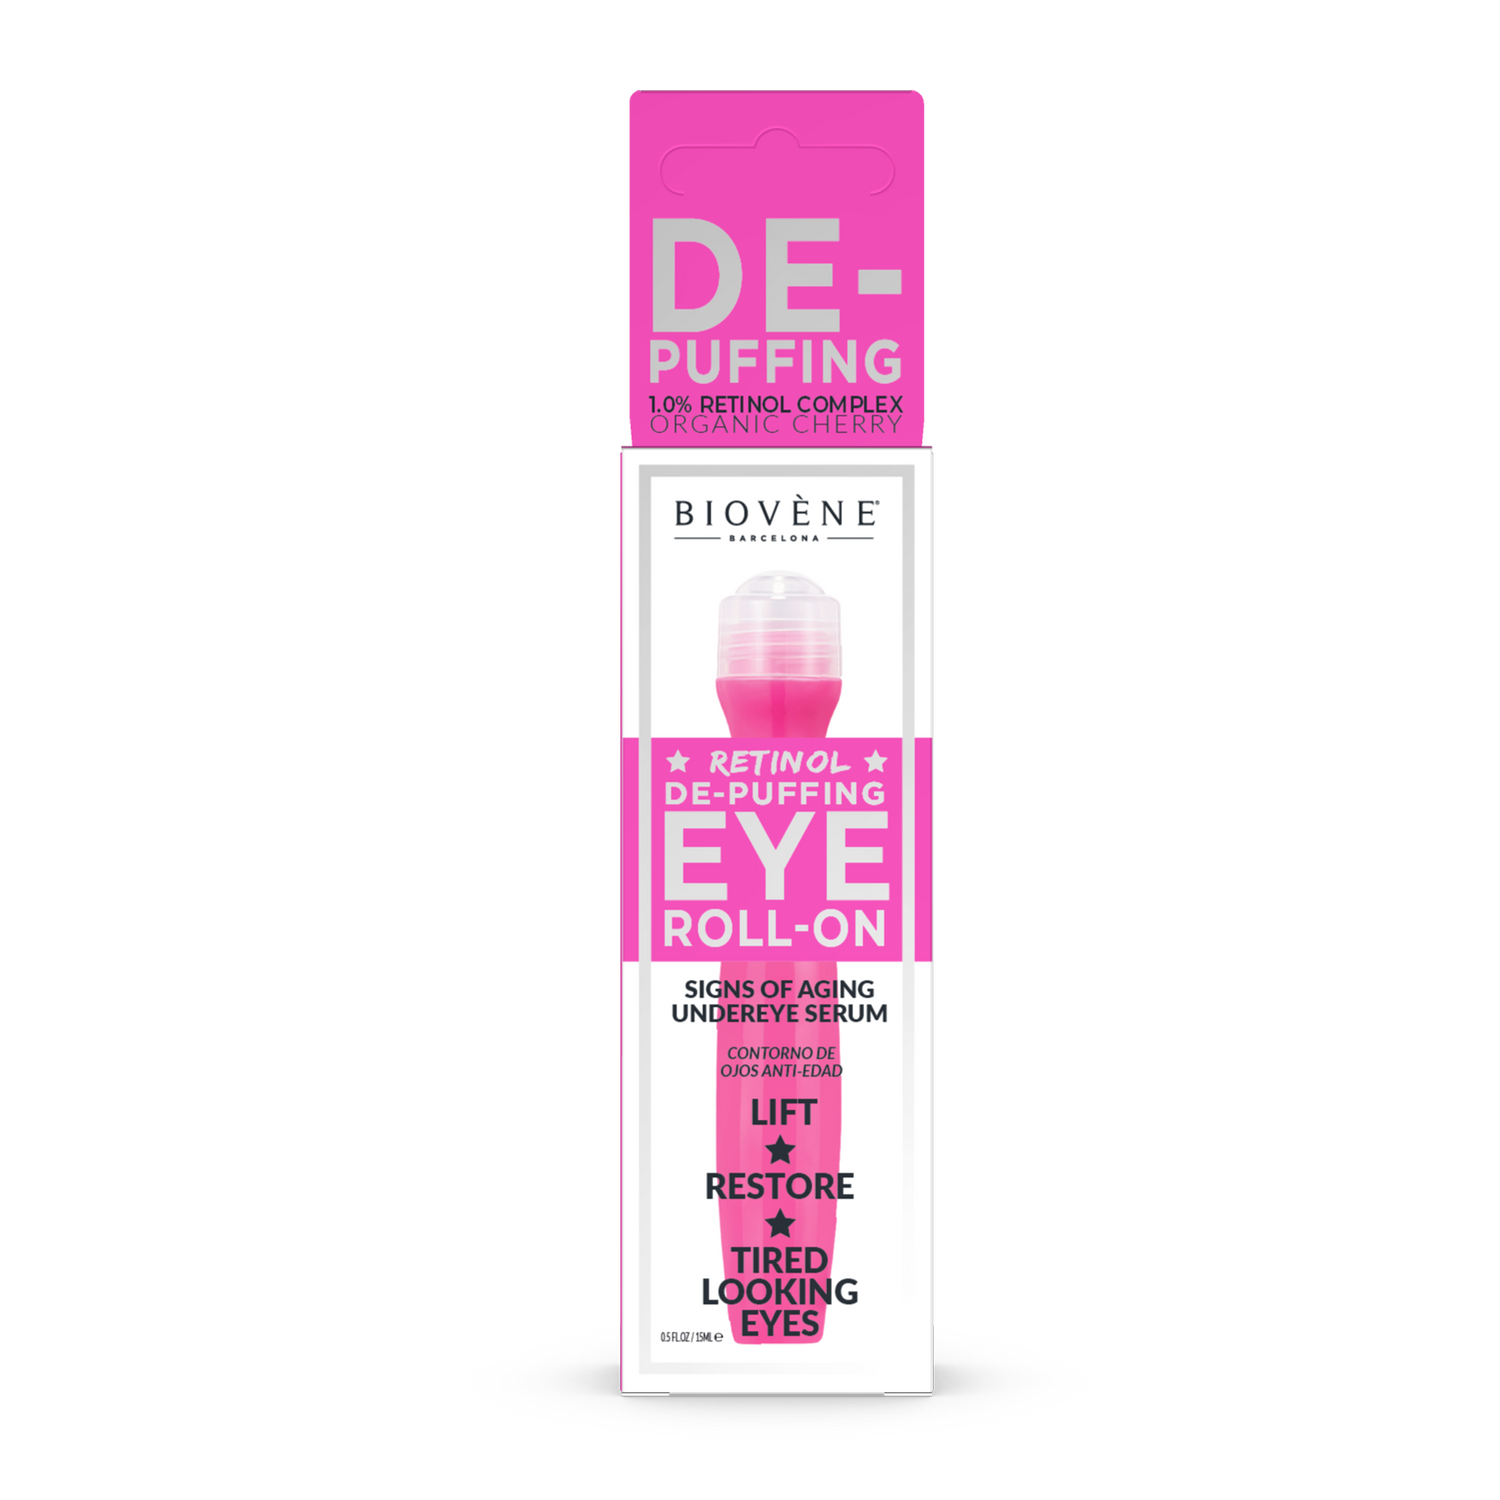 DE-PUFFING Signs of Aging 1% Retinol + Organic Cherry Eye Concentrate